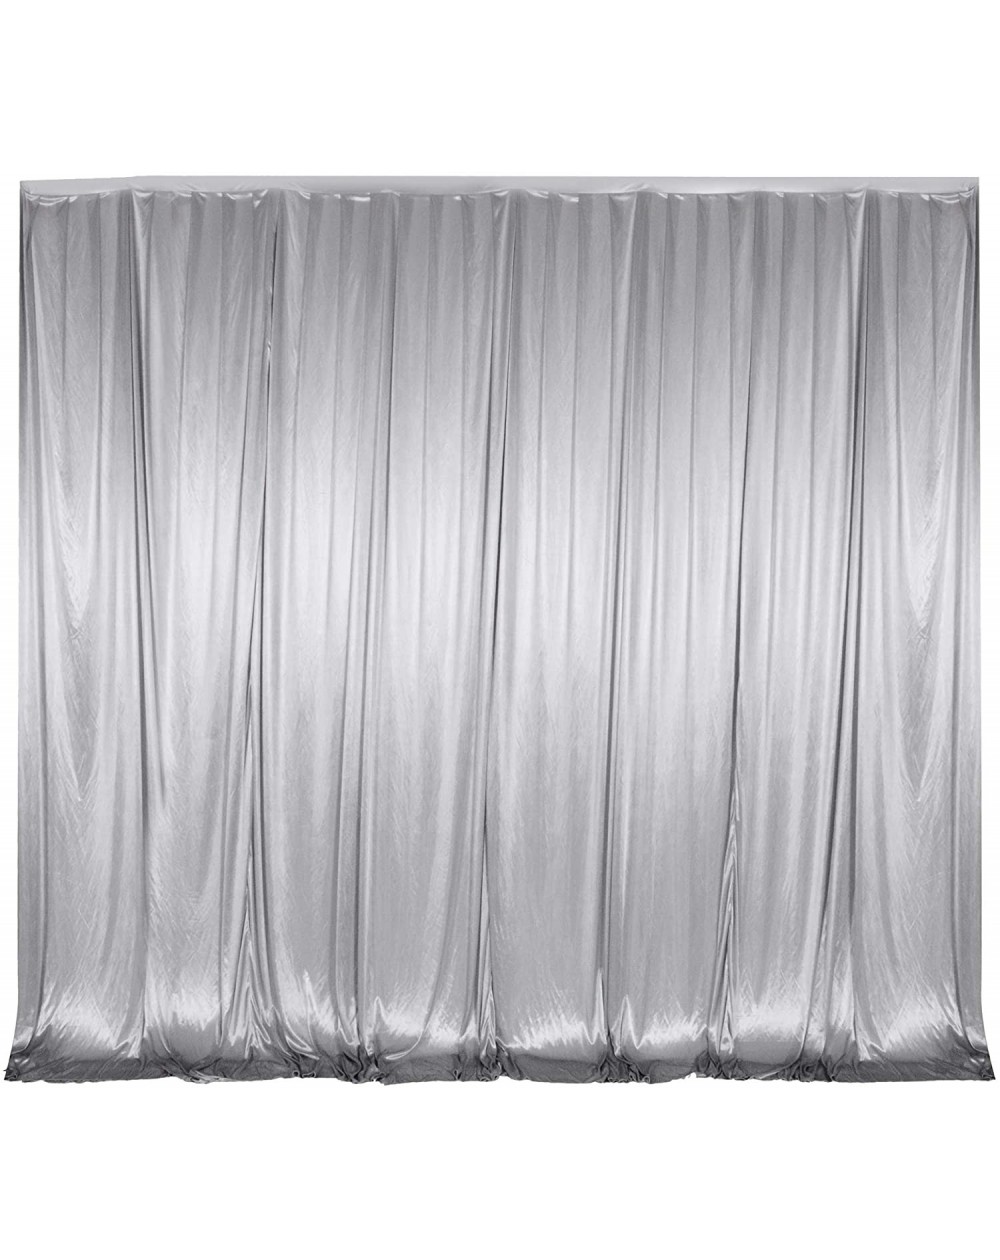 Photobooth Props 10 ft x 10 ft Photography Backdrop Drapes Curtains Wedding Backdrop- for Baby Shower Birthday Home Party Eve...